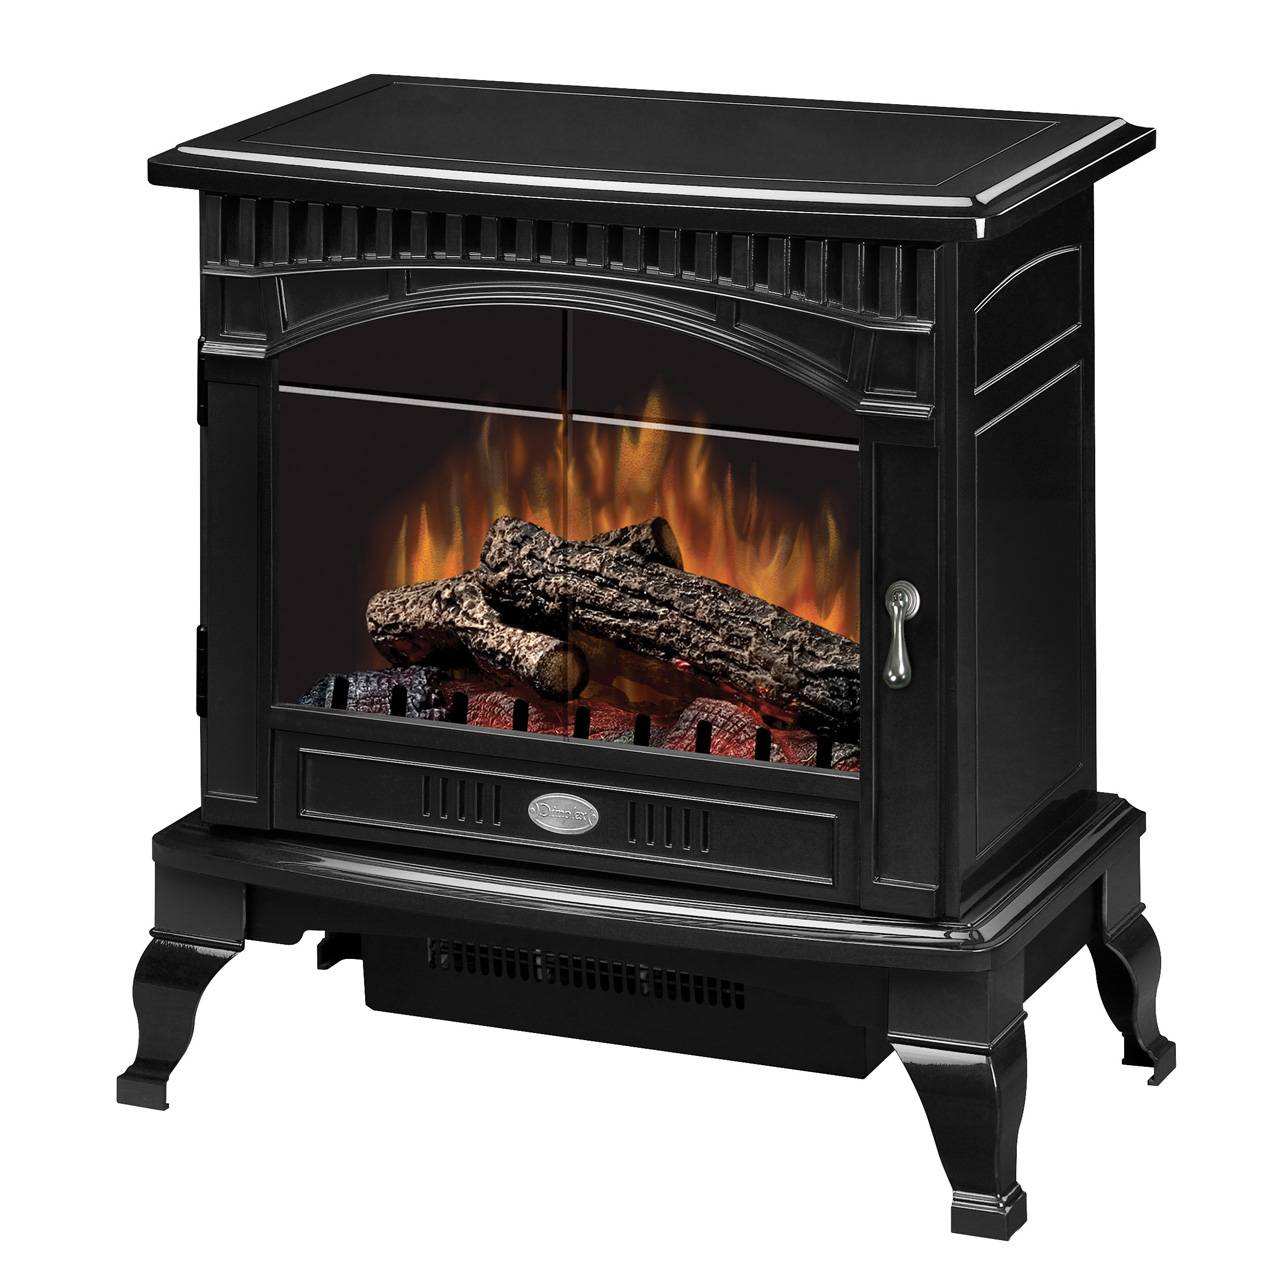 dimplex stoves inspirational dimplex electric fireplaces stoves products of dimplex stoves